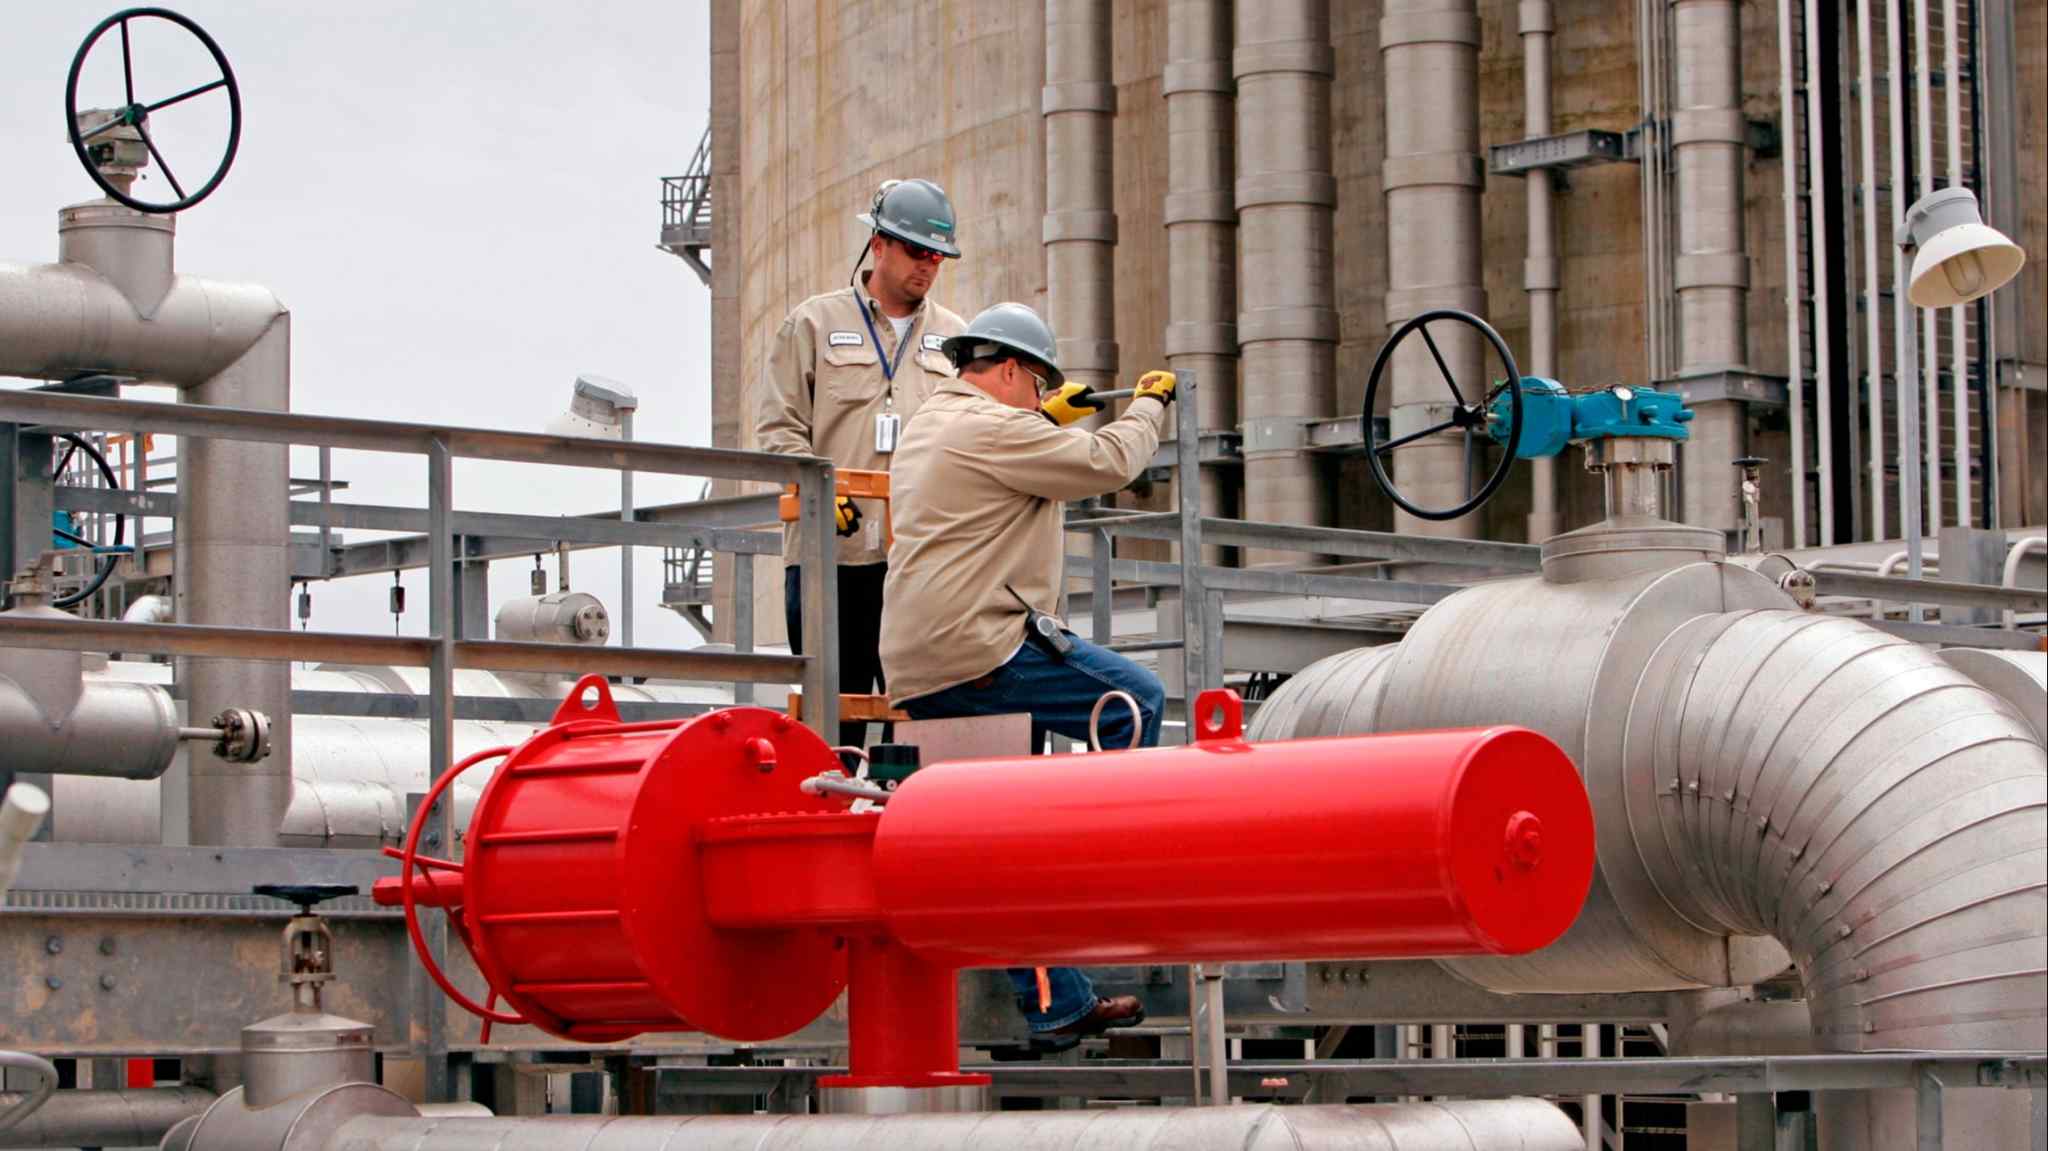 Live news: US natural gas price drops 10% on reduced expectations for fuel demand